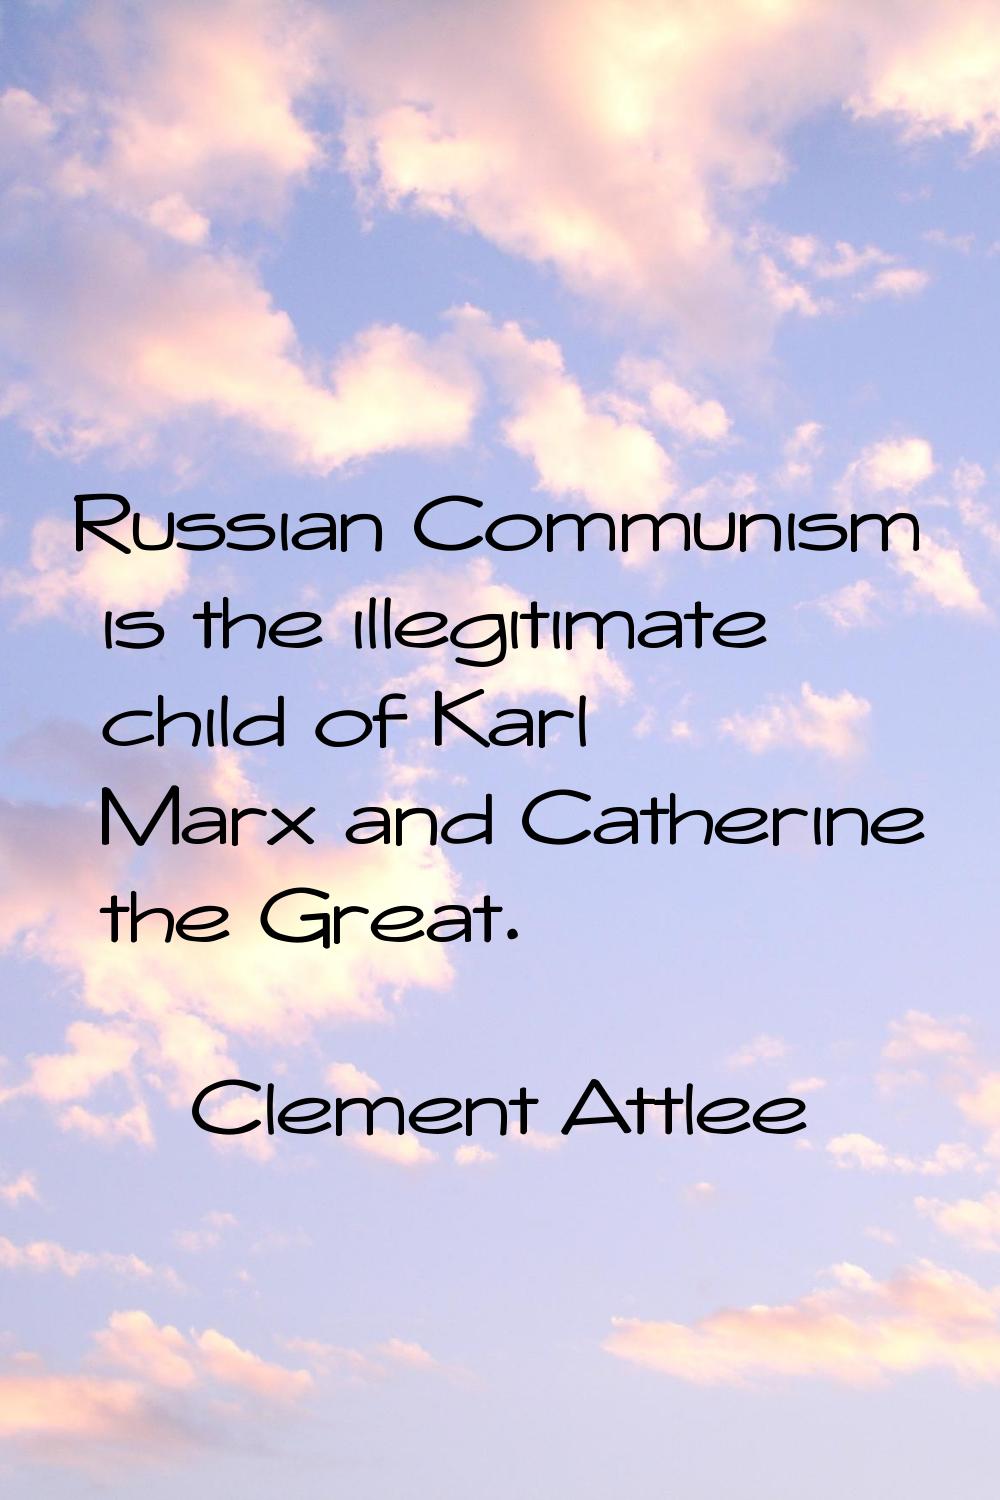 Russian Communism is the illegitimate child of Karl Marx and Catherine the Great.